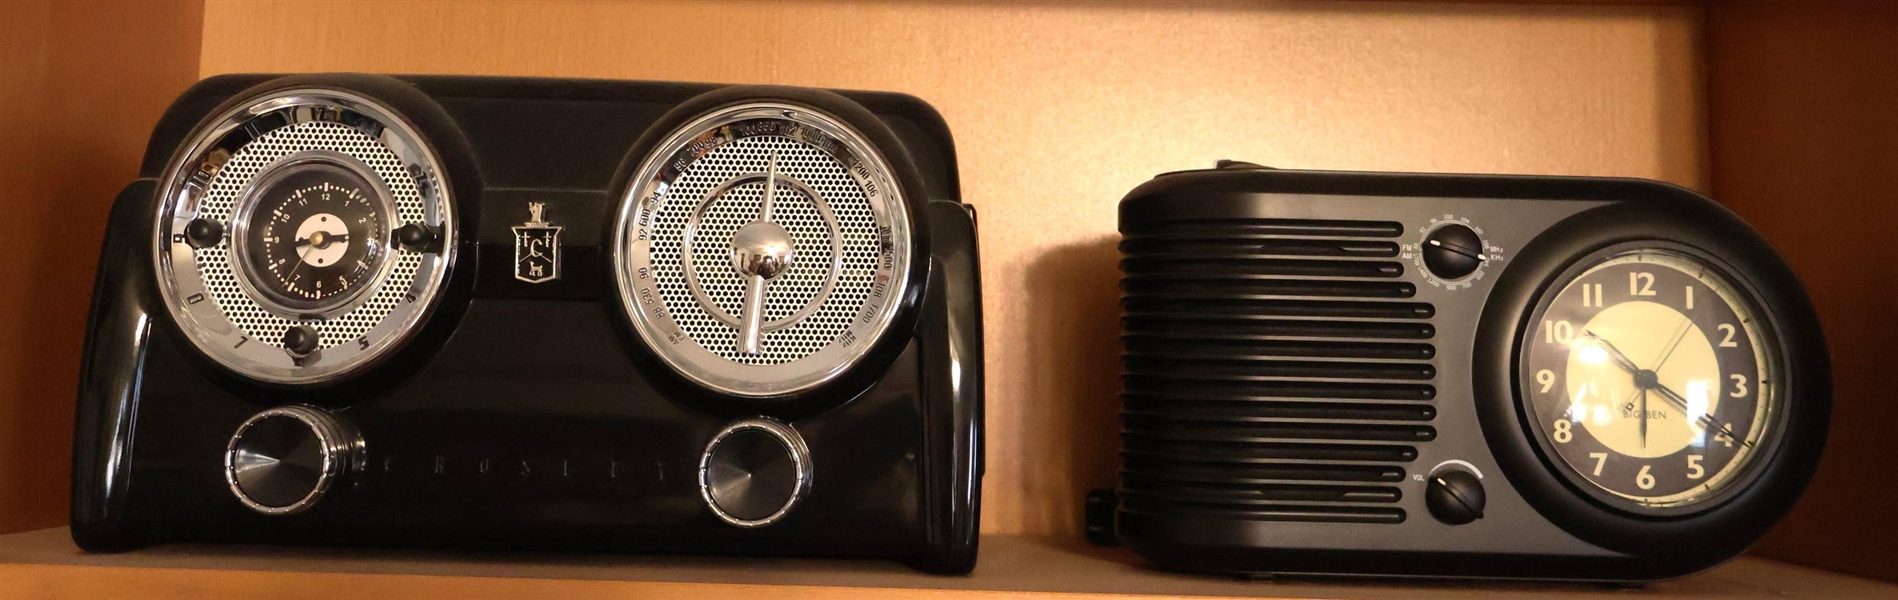 Crosley Model CR 52 Clock Radio - Manufactured 2002 - With Cassette Player and Big Ben Clock Radio 